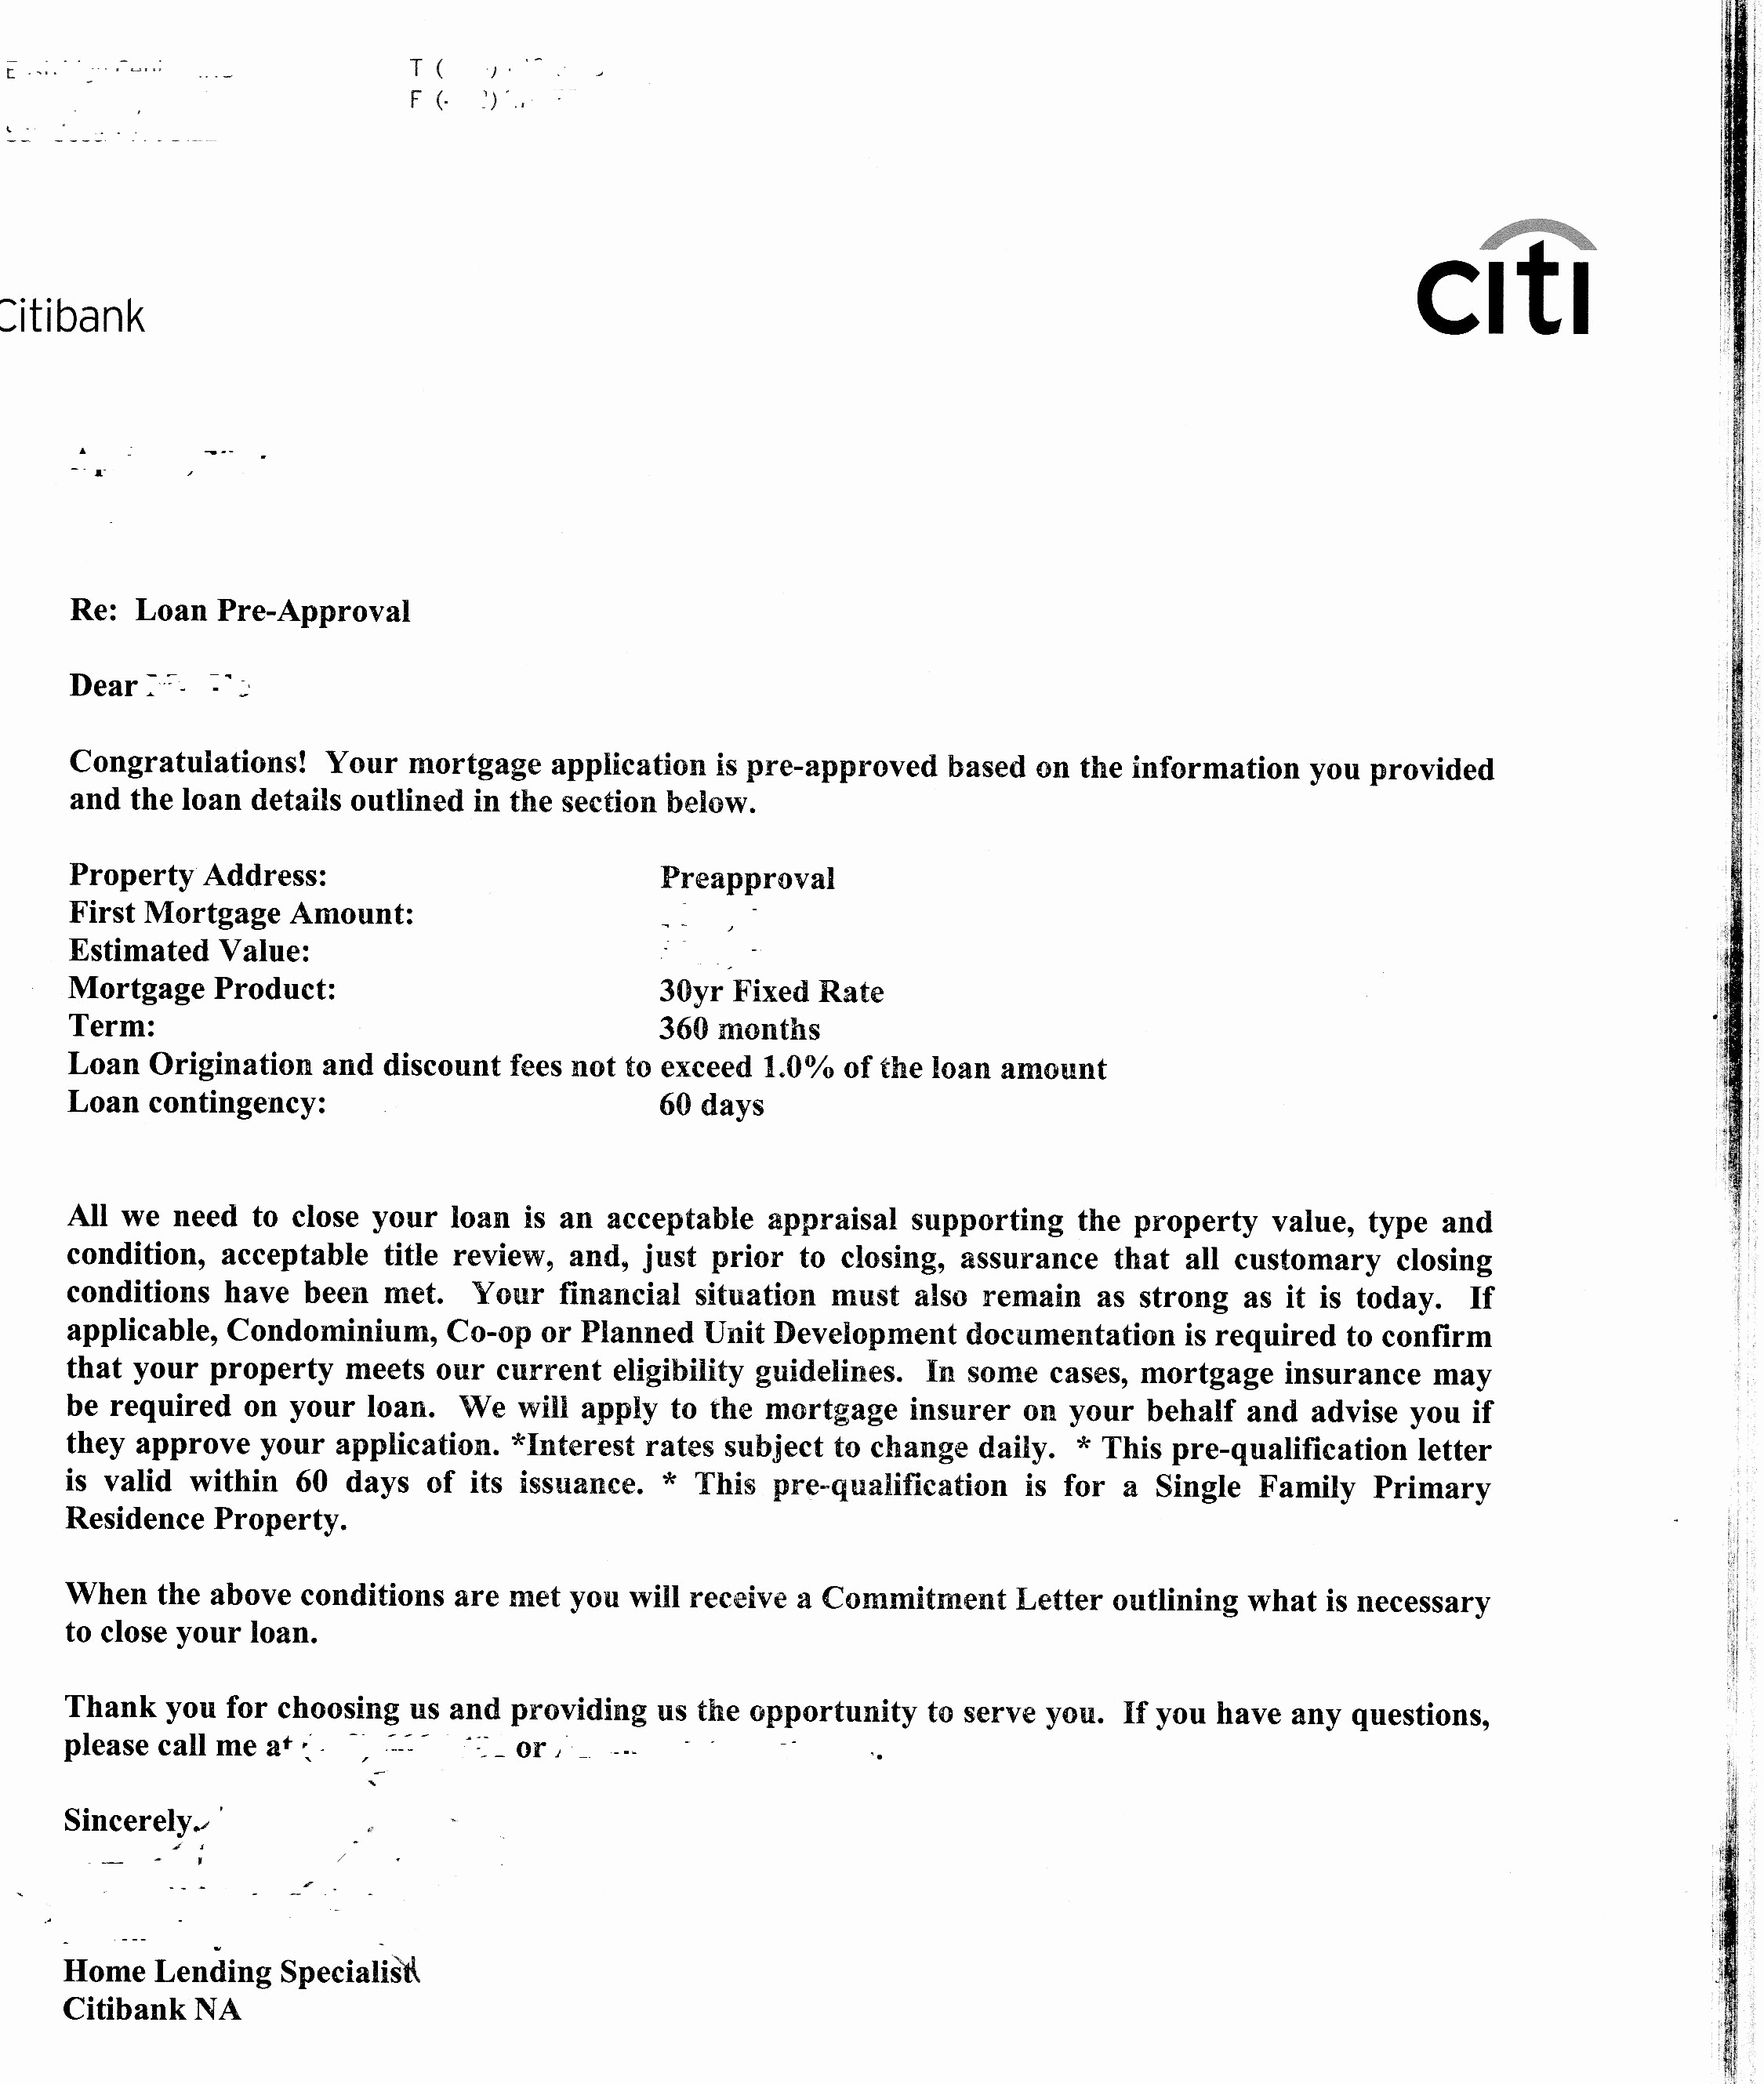 mortgage pre approval letter template example-Capital e Preapproved Auto Loan Letter Inspirational Great Mortgage Pre Approval Letter Sample Pre Approval Letter 12-a